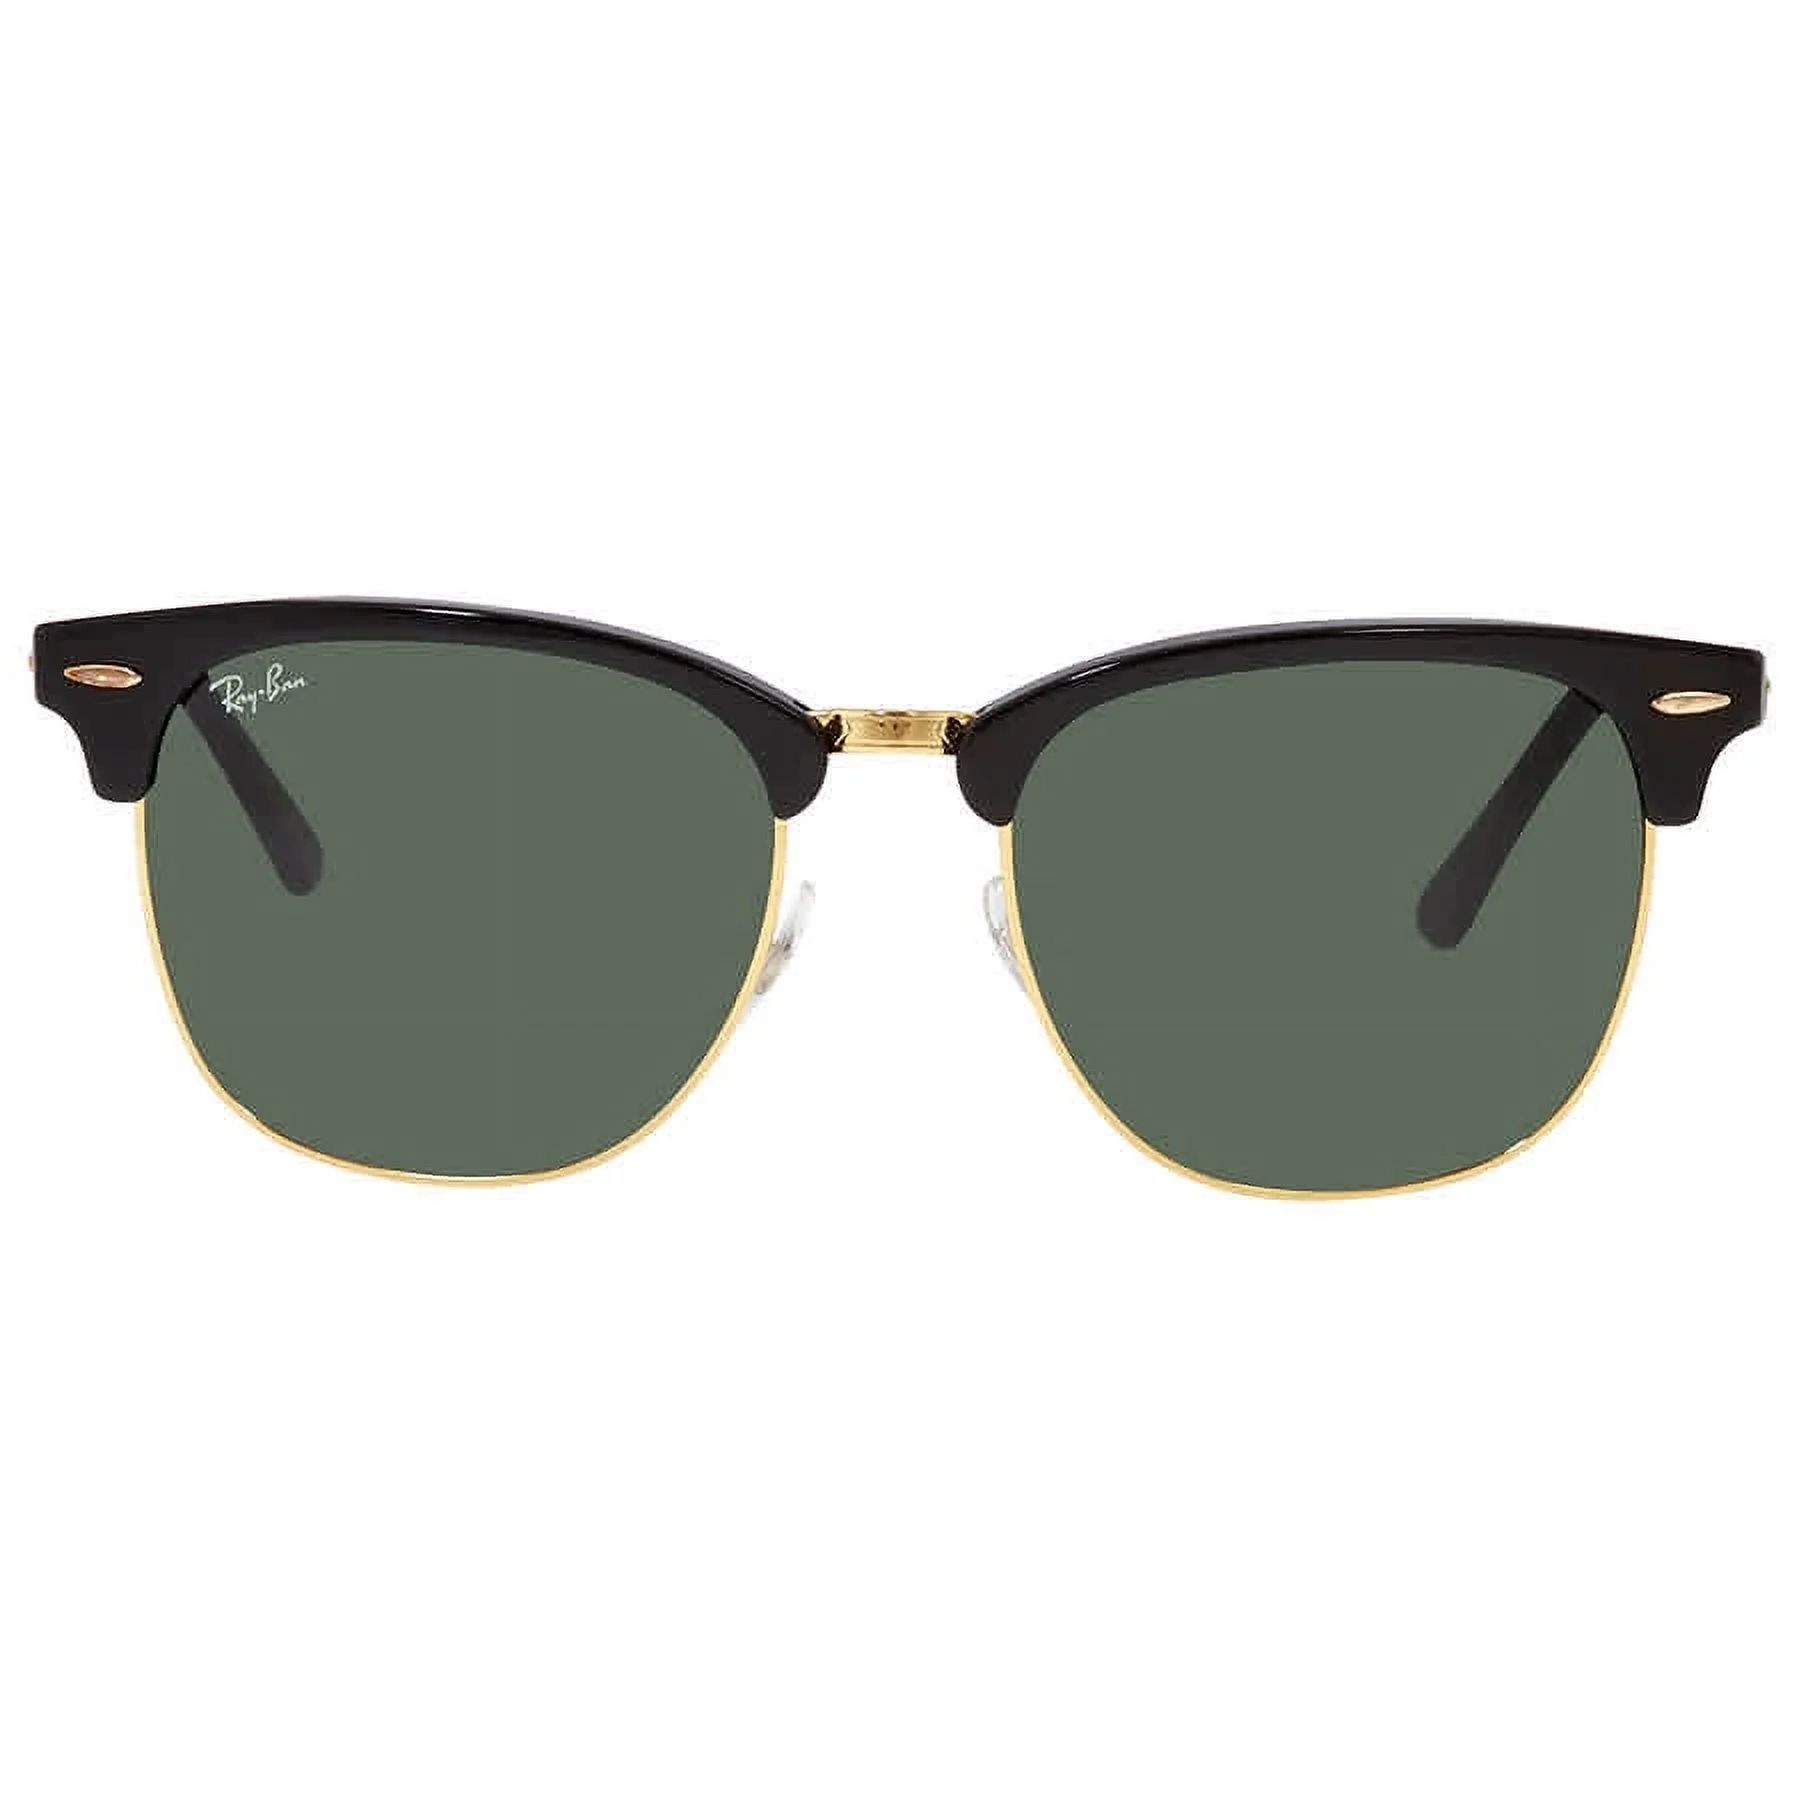 Ray Ban Clubmaster Classic Green Square Unisex Sunglasses RB3016 W0365 55 | Walmart (US)